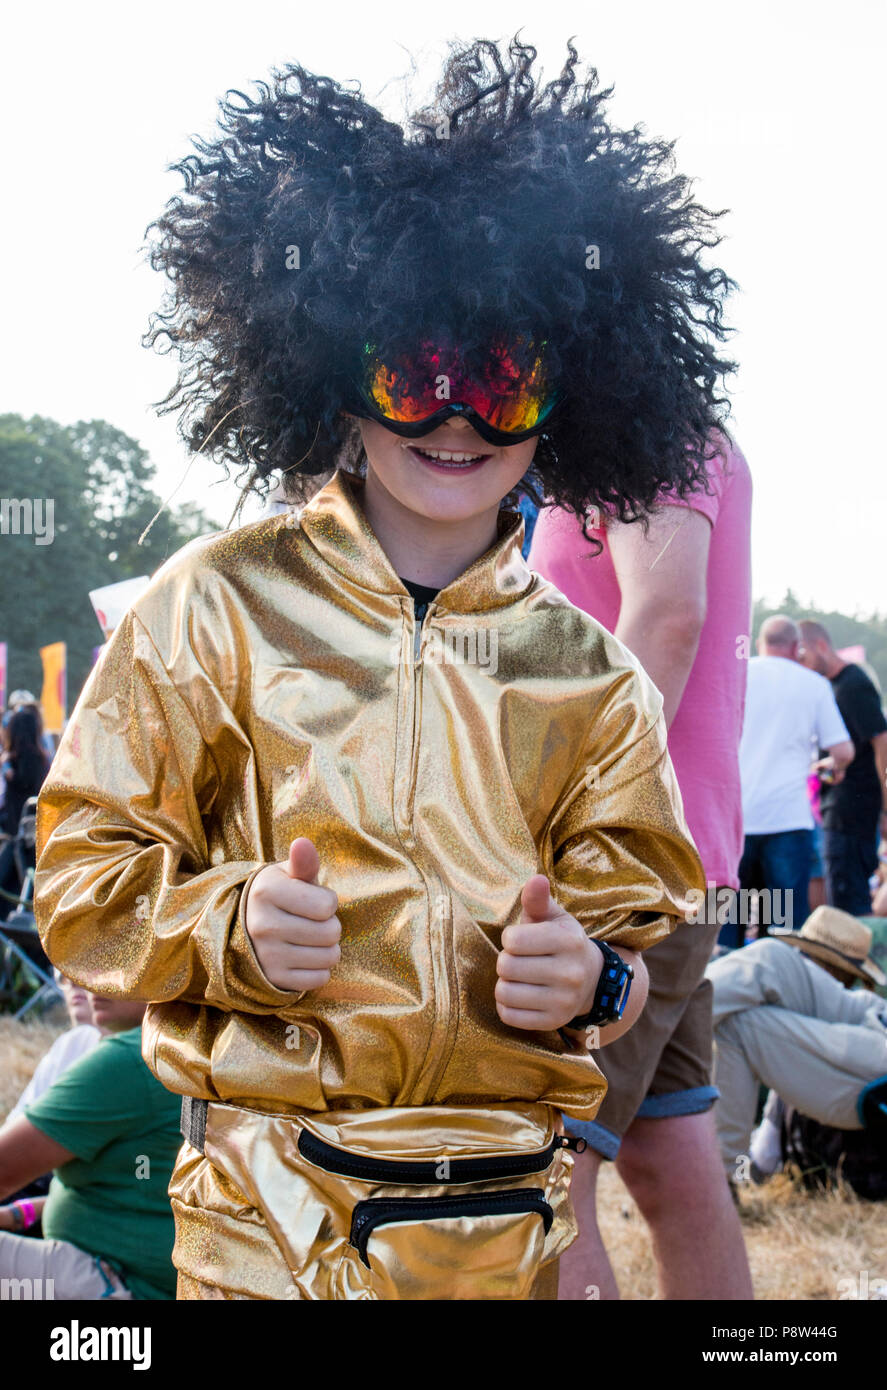 Portrait of a young festival goer enjoying the music wearing fancy dress with wig, at the Obelisk Stage at Latitude Festival, Henham Park, Suffolk, England, 13 July 2018. Stock Photo